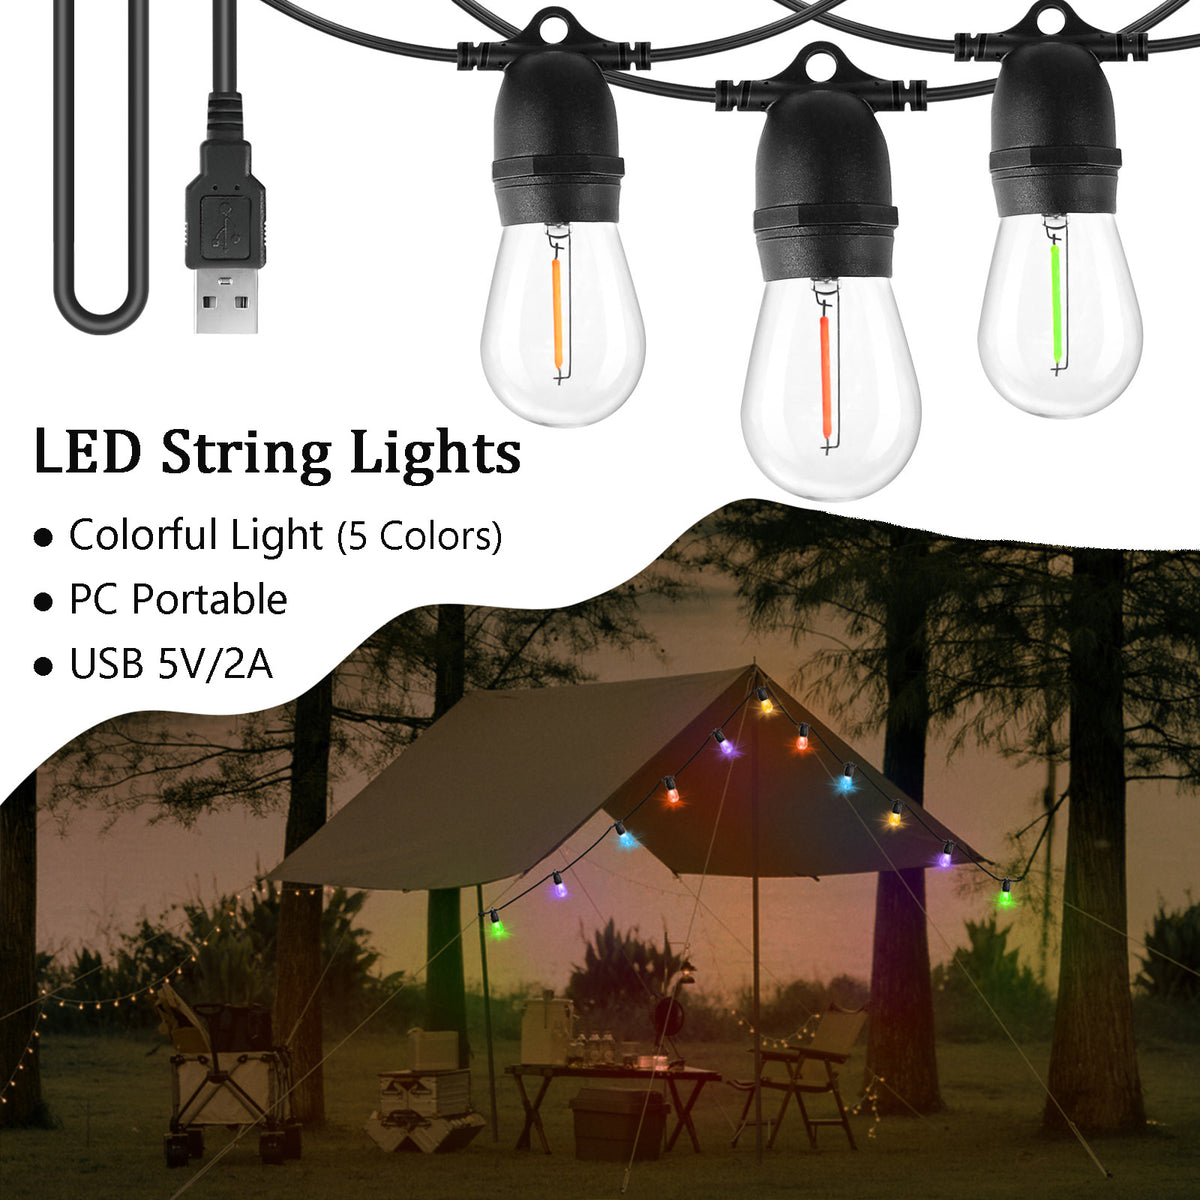 BRIMAX DC5V Clear Plastic 10W Colorful Festoon S14 USB LED String Lights Non-dimmable (1Pack)